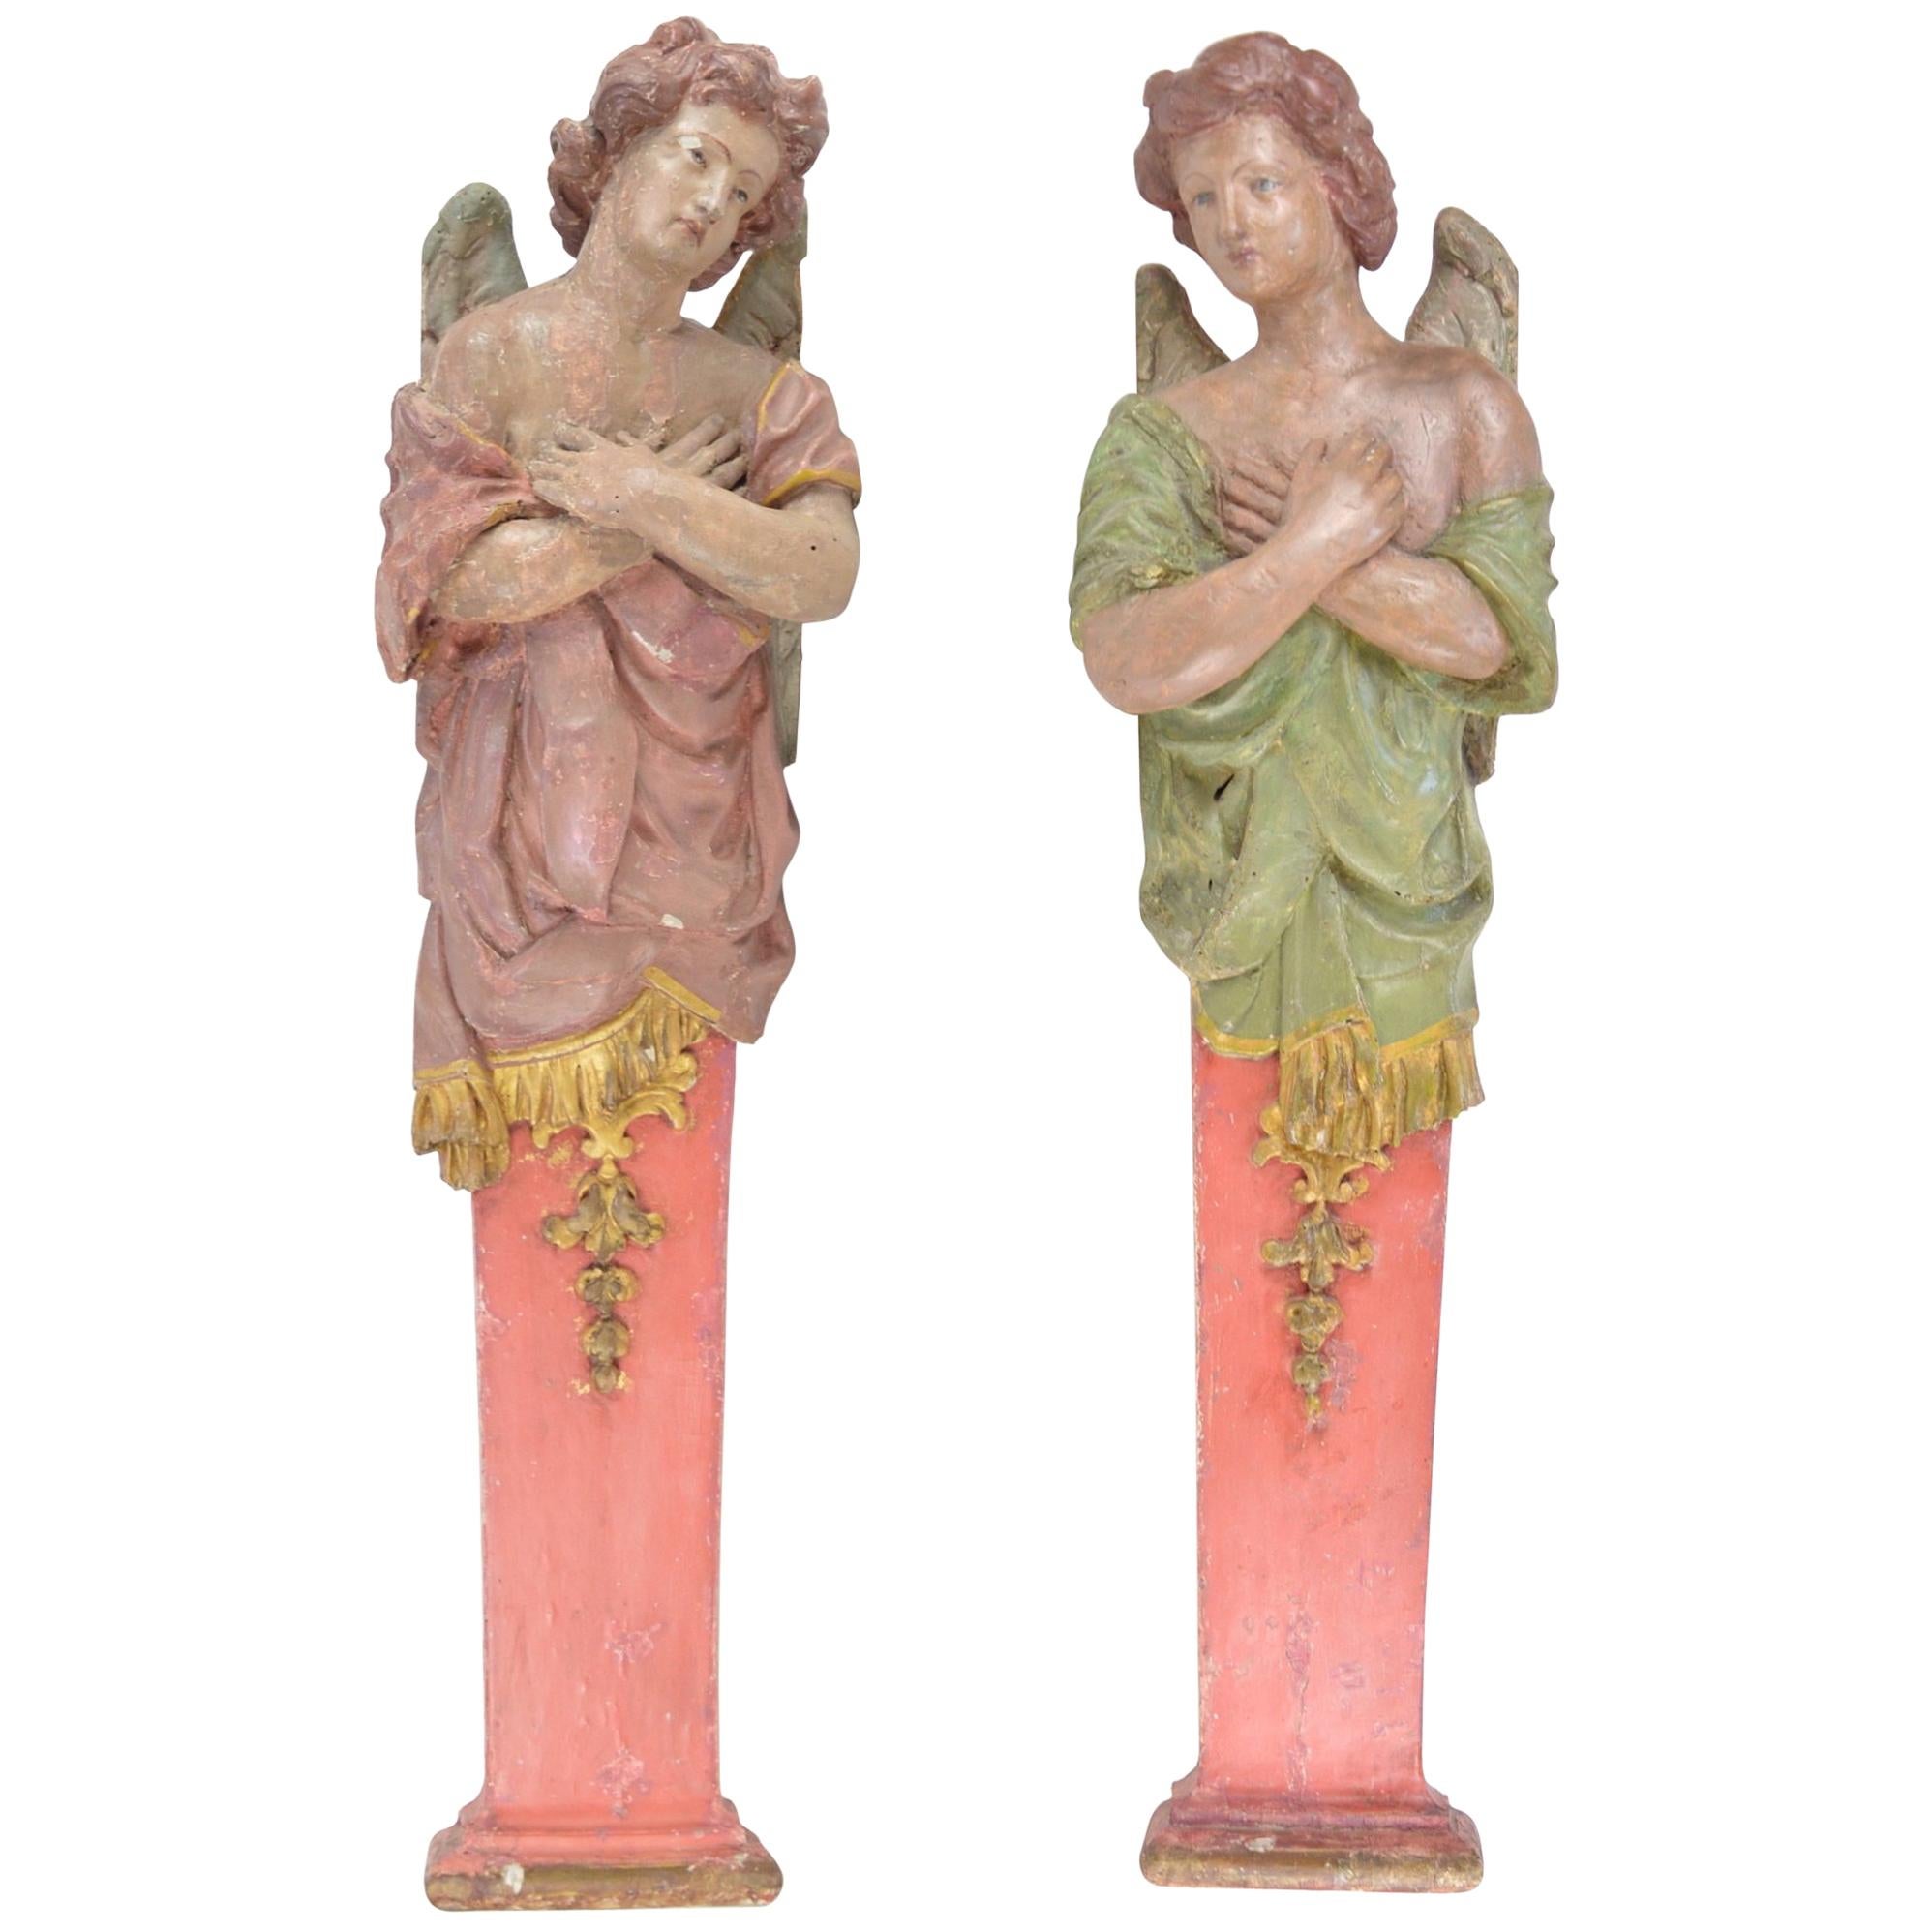 Pair of Polychrome Wooden 17th-18th Century Angel Sculptures Flemish School